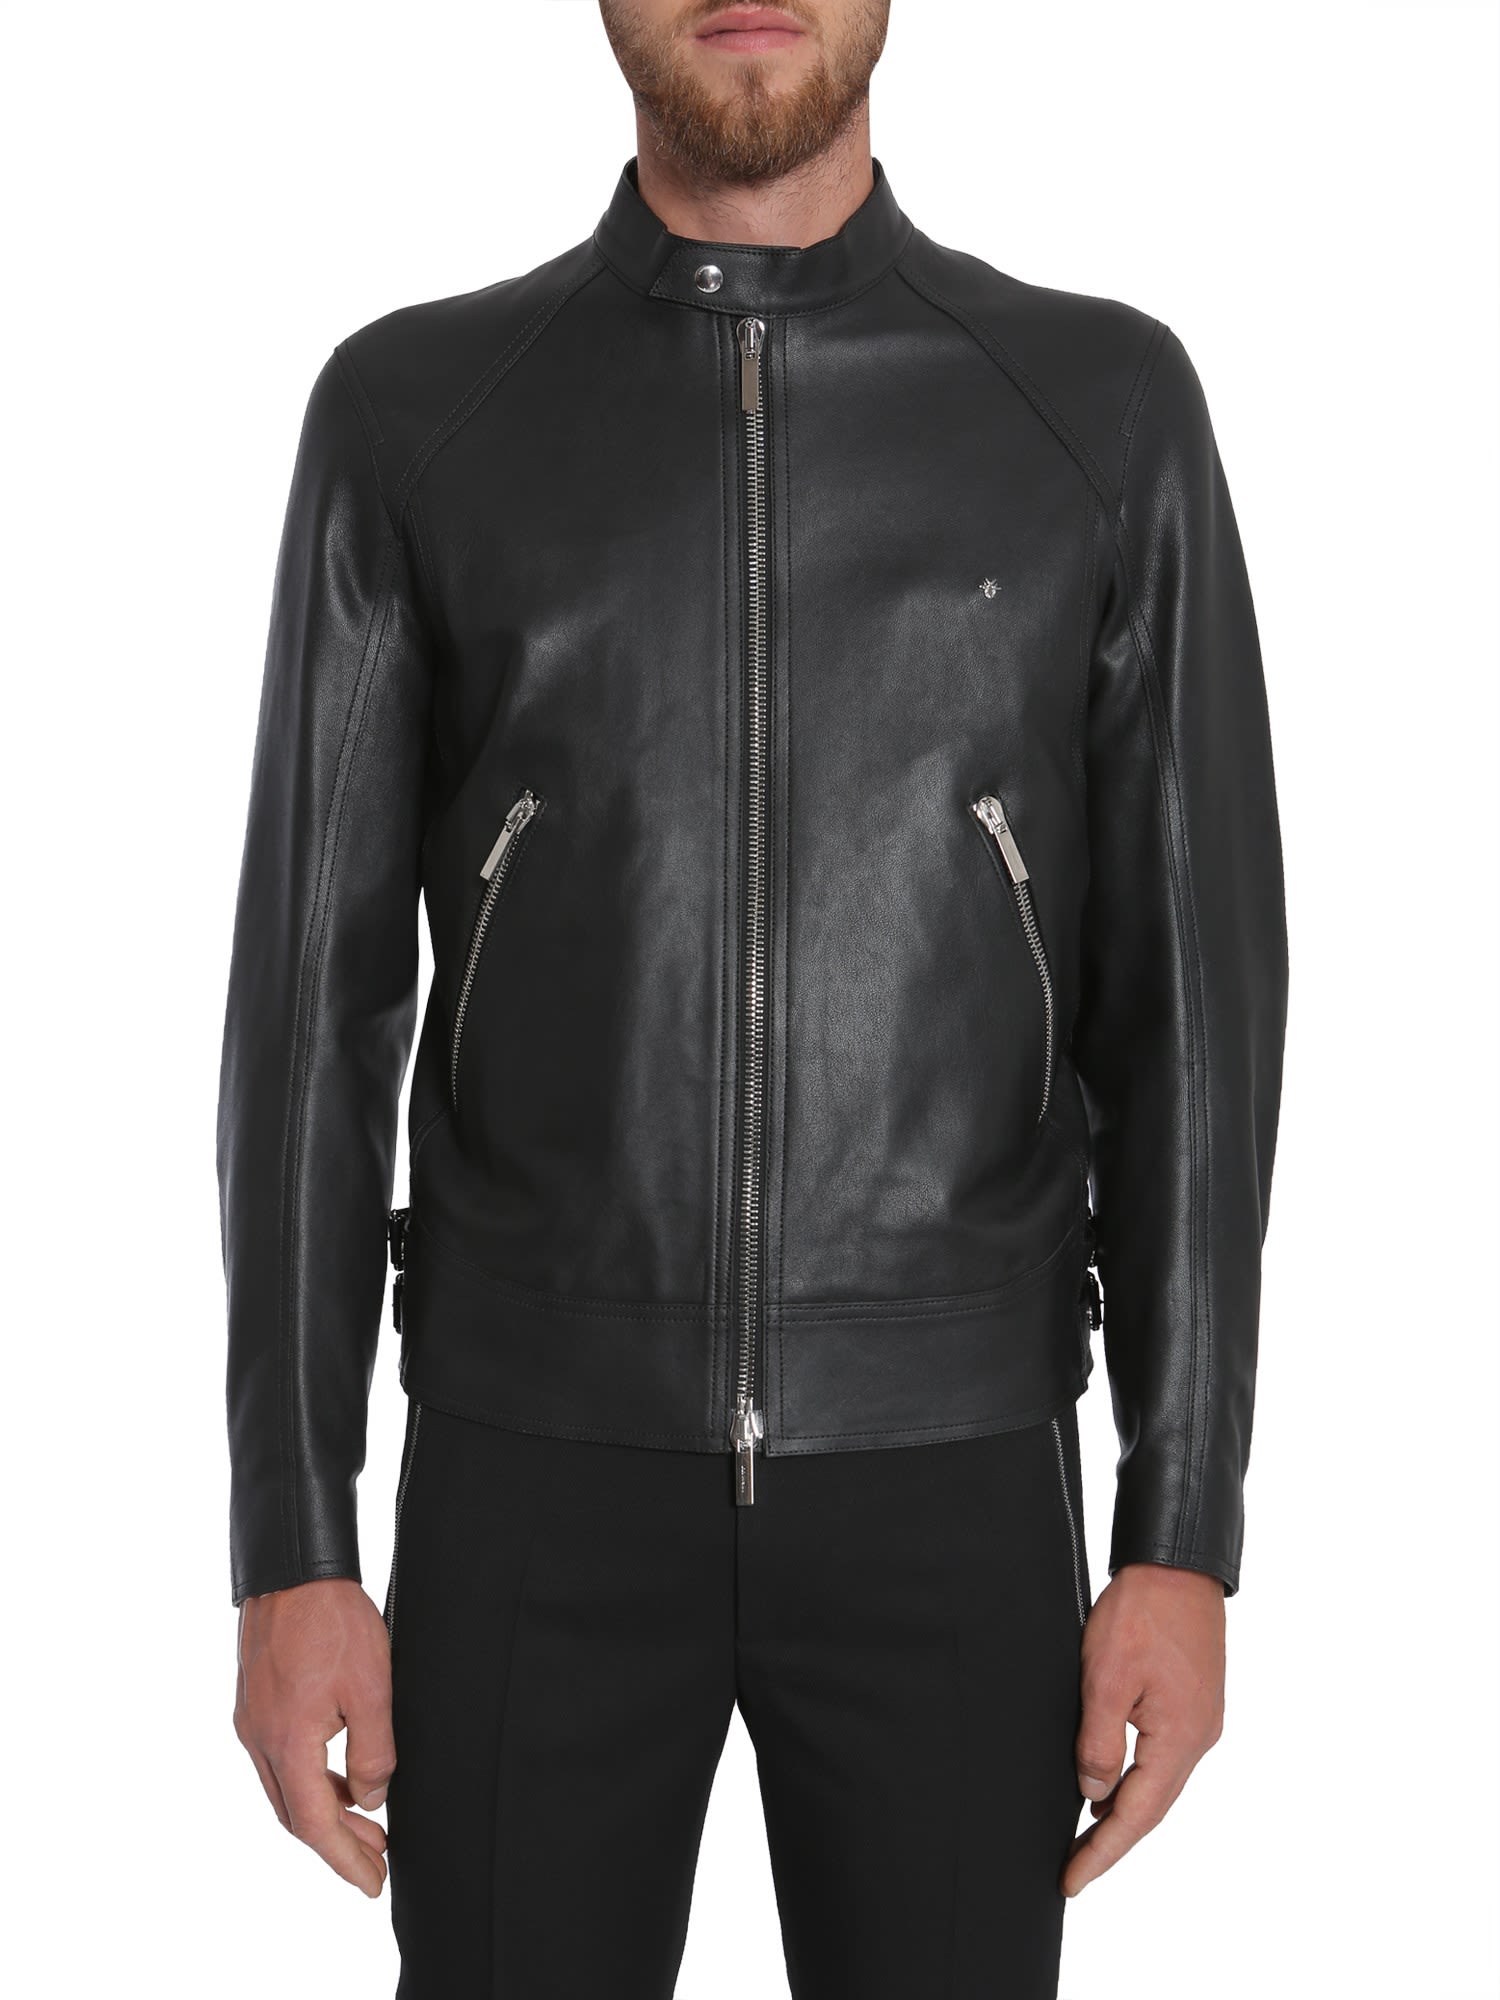 Dior Homme - Leather Jacket - NERO, Men's Leather Jackets | Italist